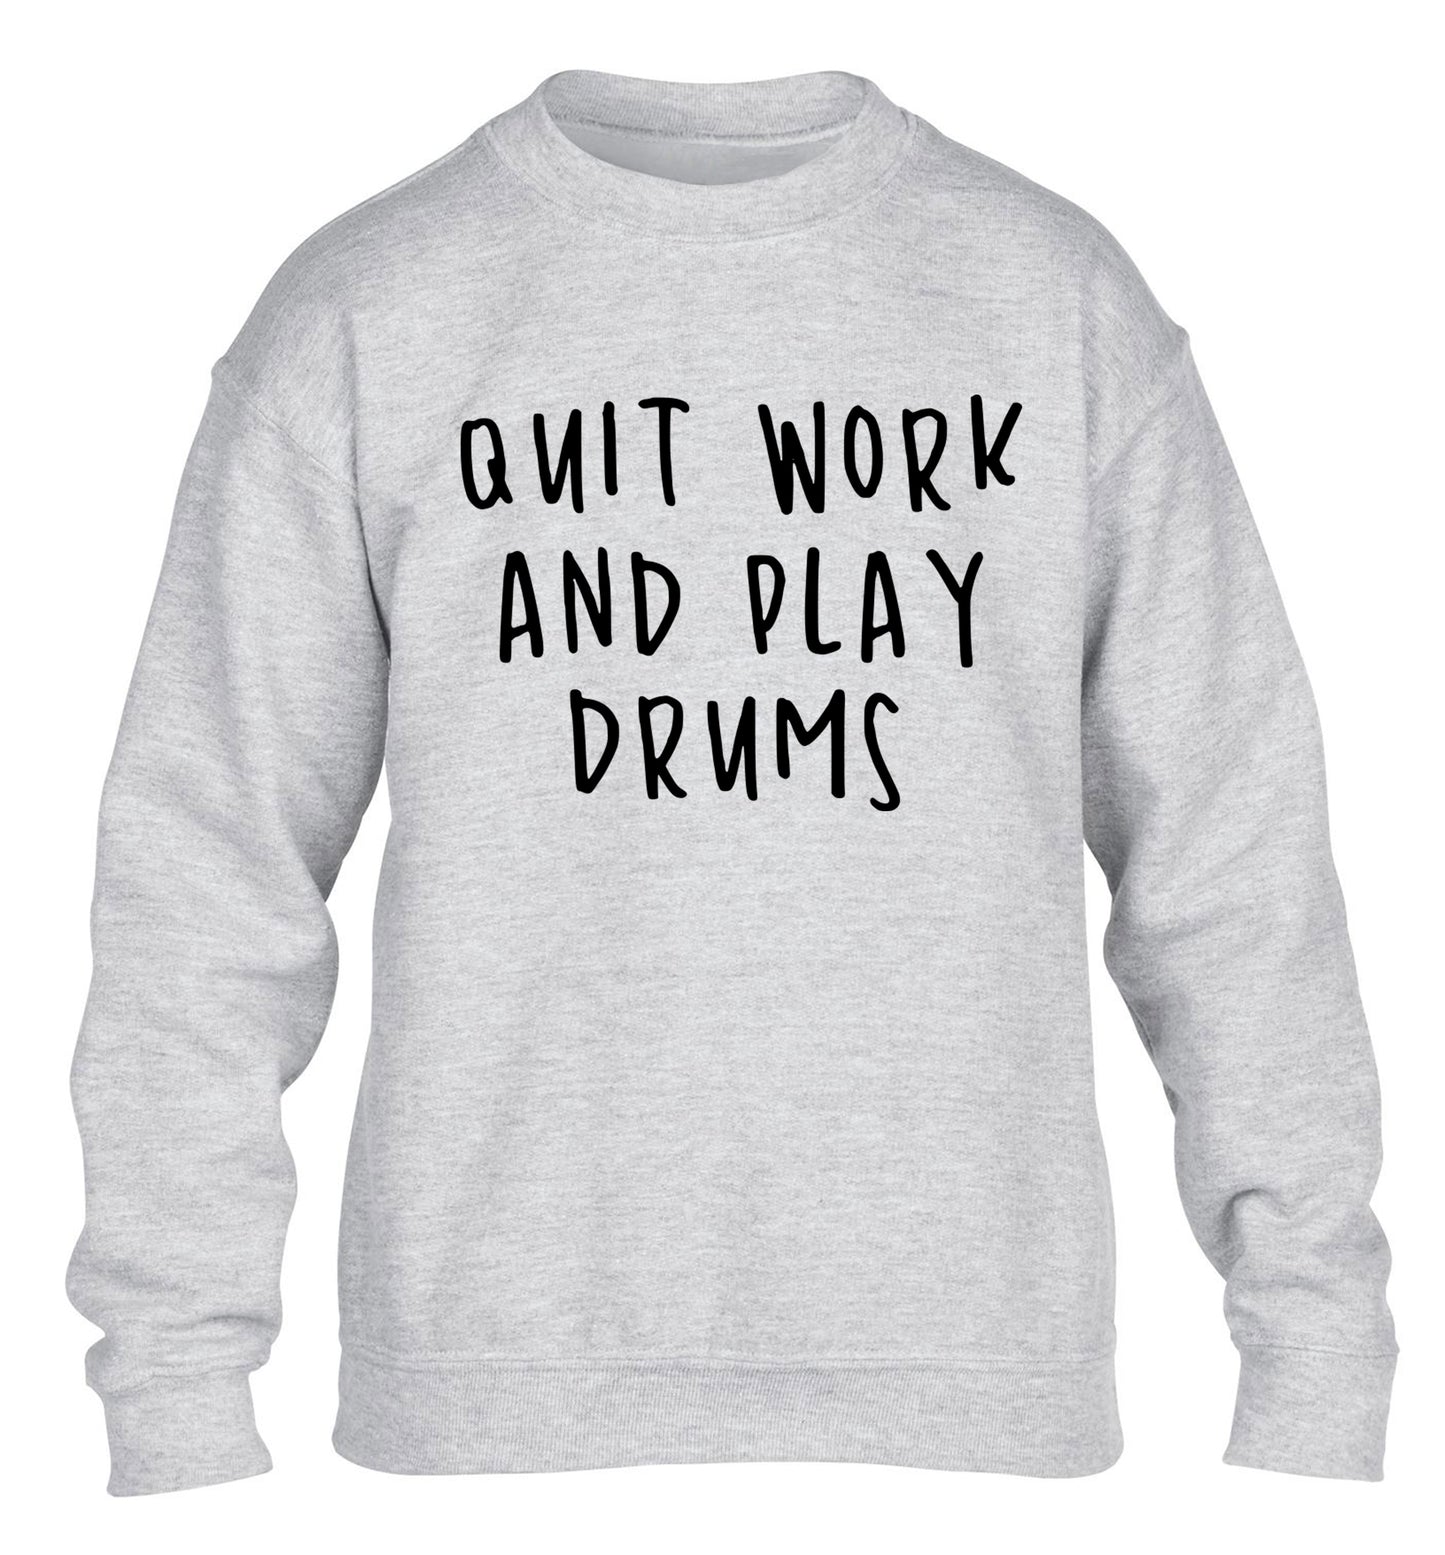 Quit work and play drums children's grey sweater 12-14 Years